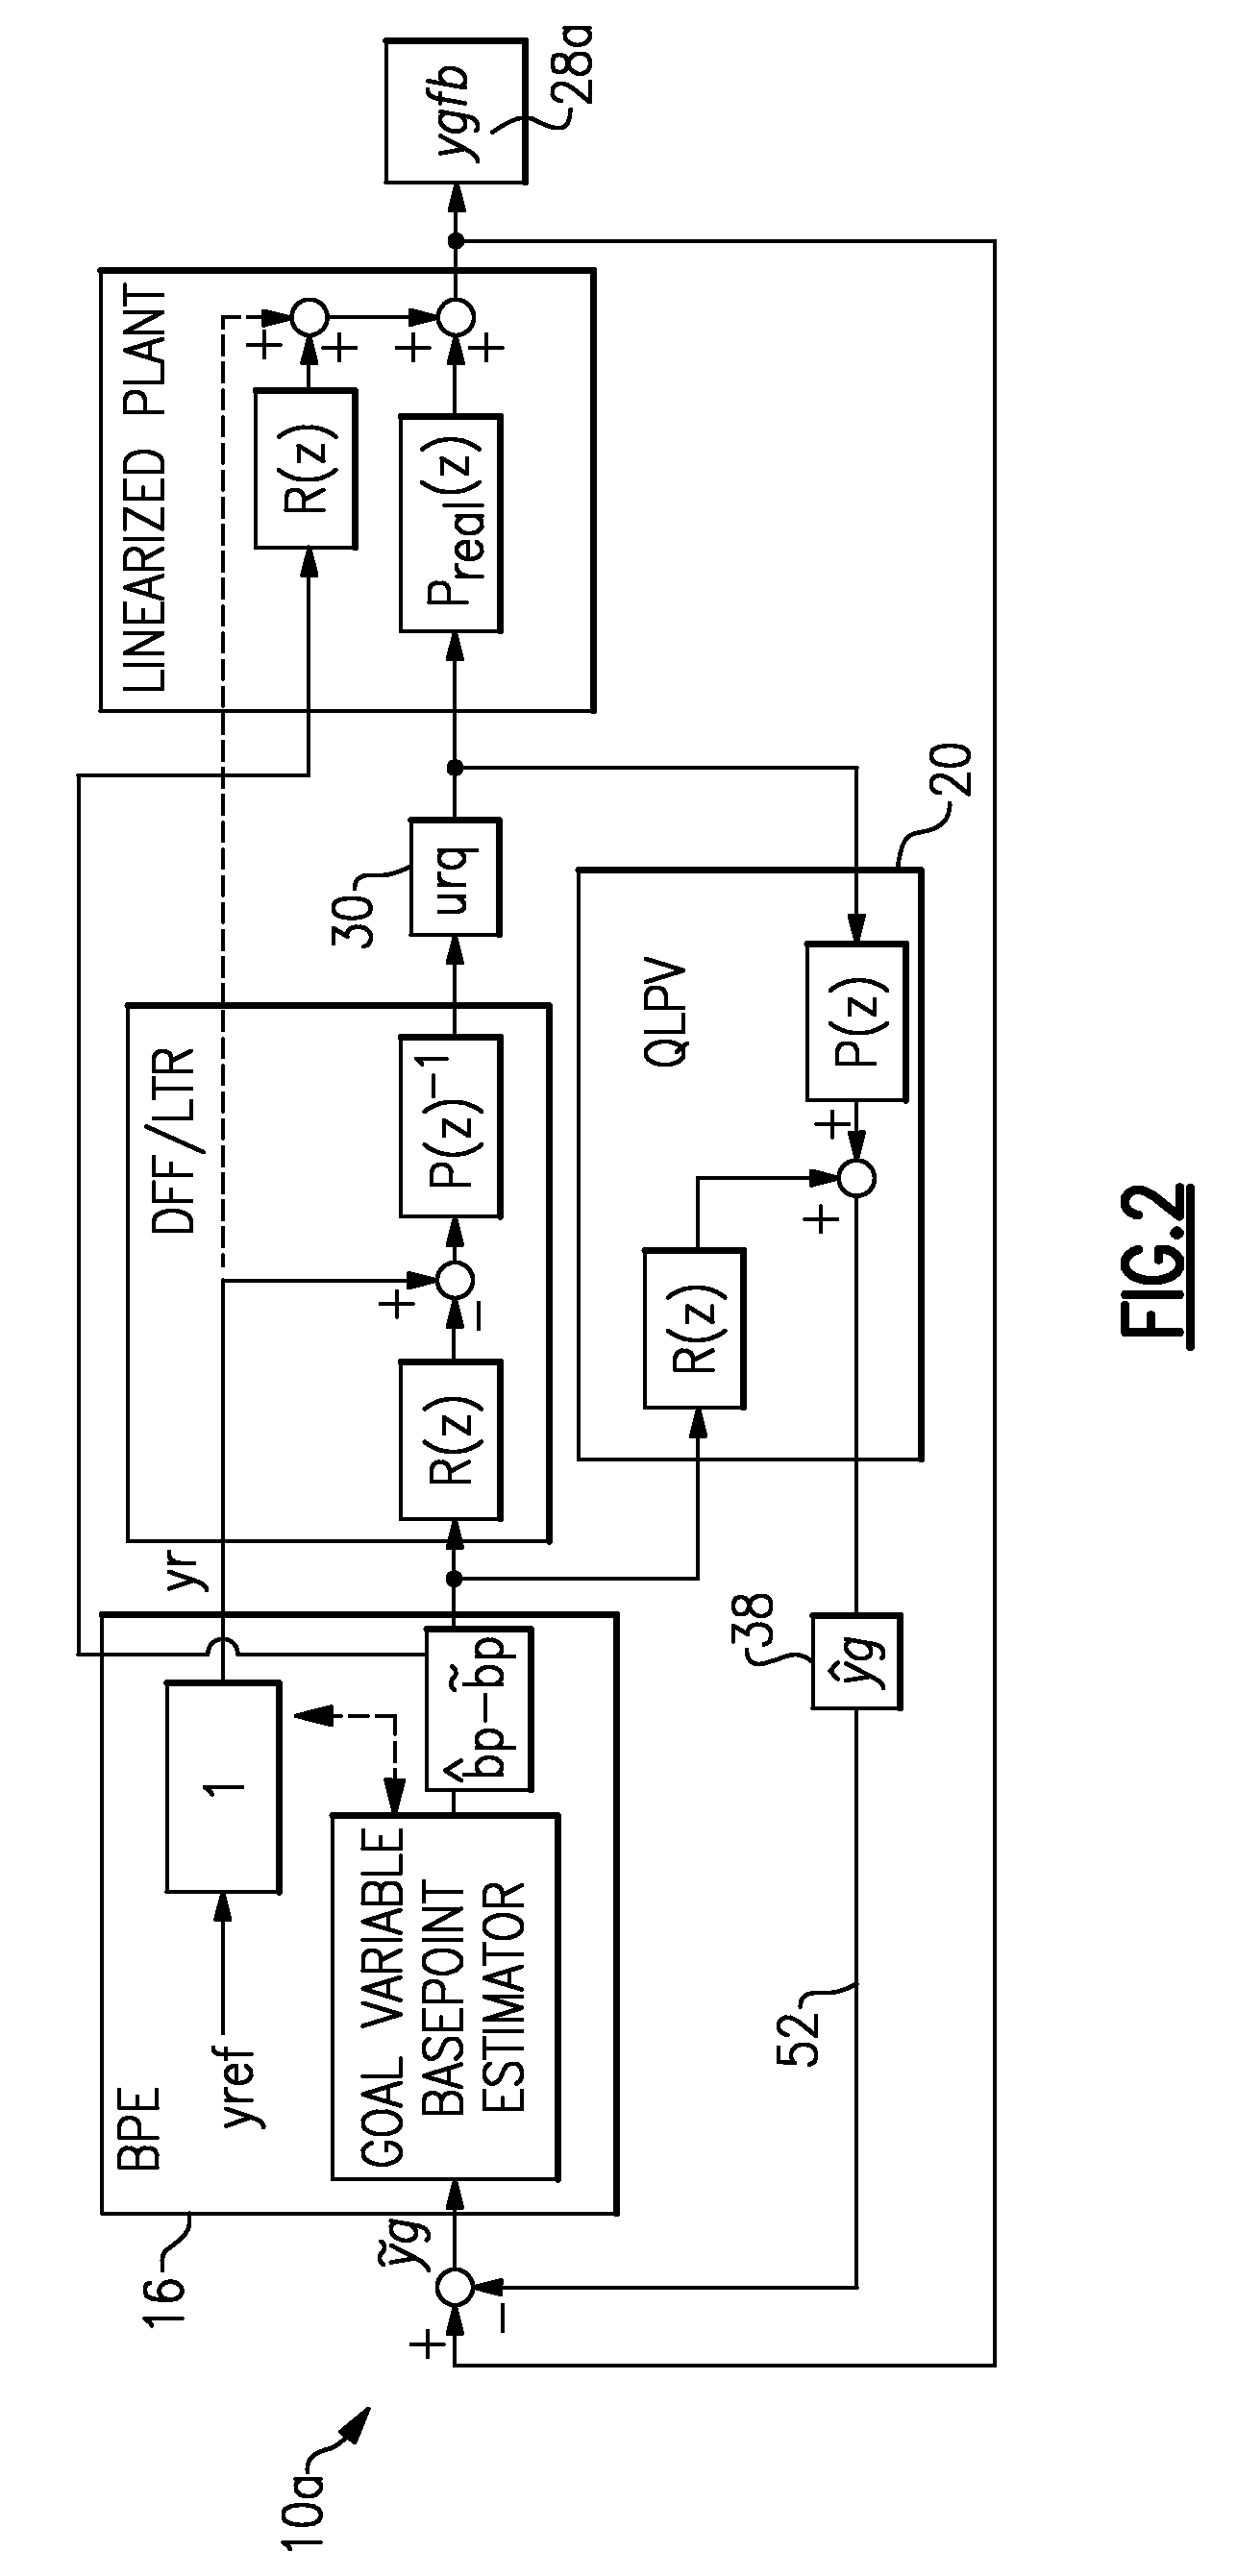 Multivariable control system